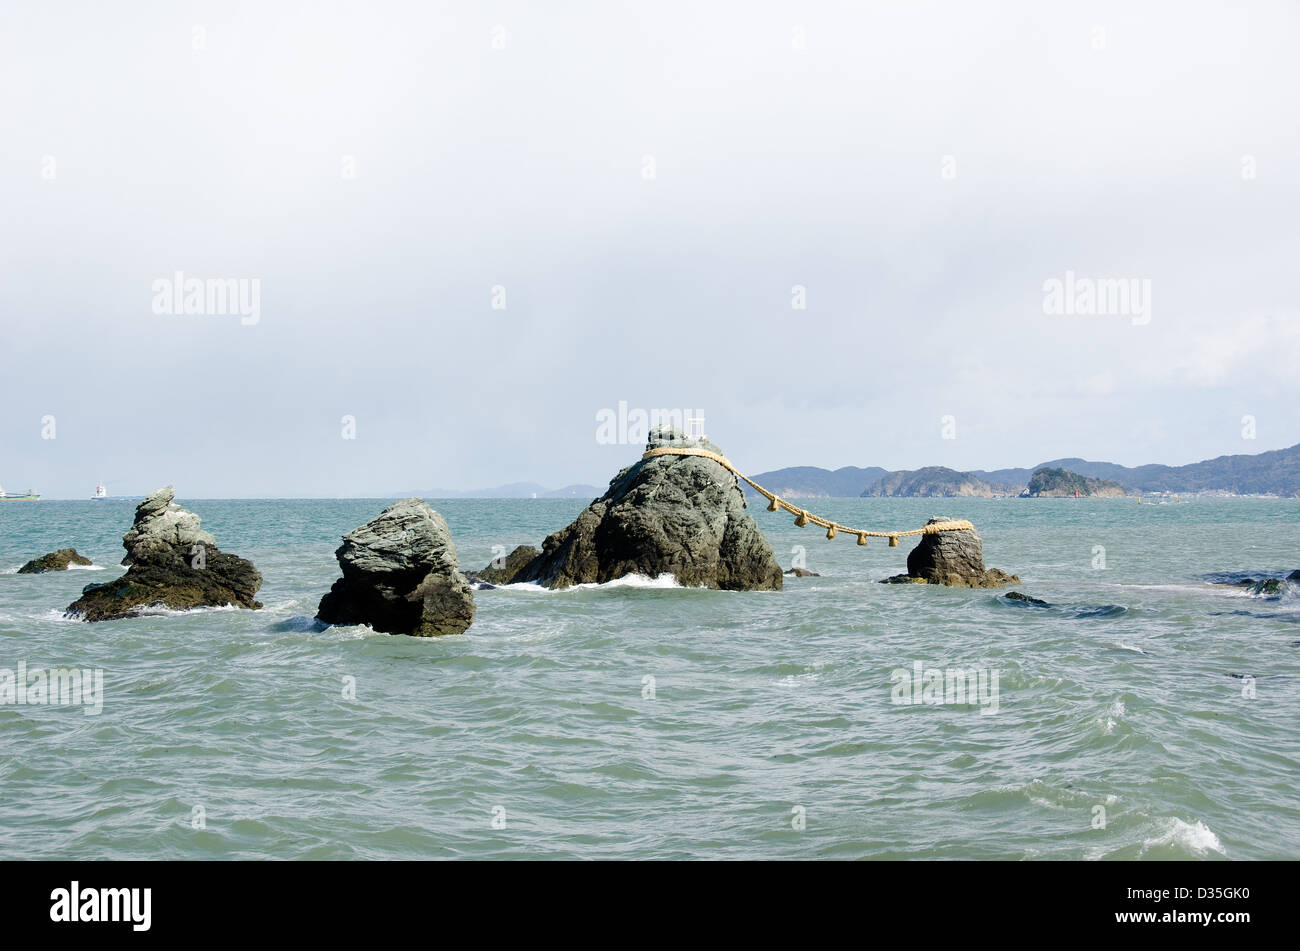 Meoto Iwa or the Loved one and loved one Rocks at Mie, Japan Stock Photo